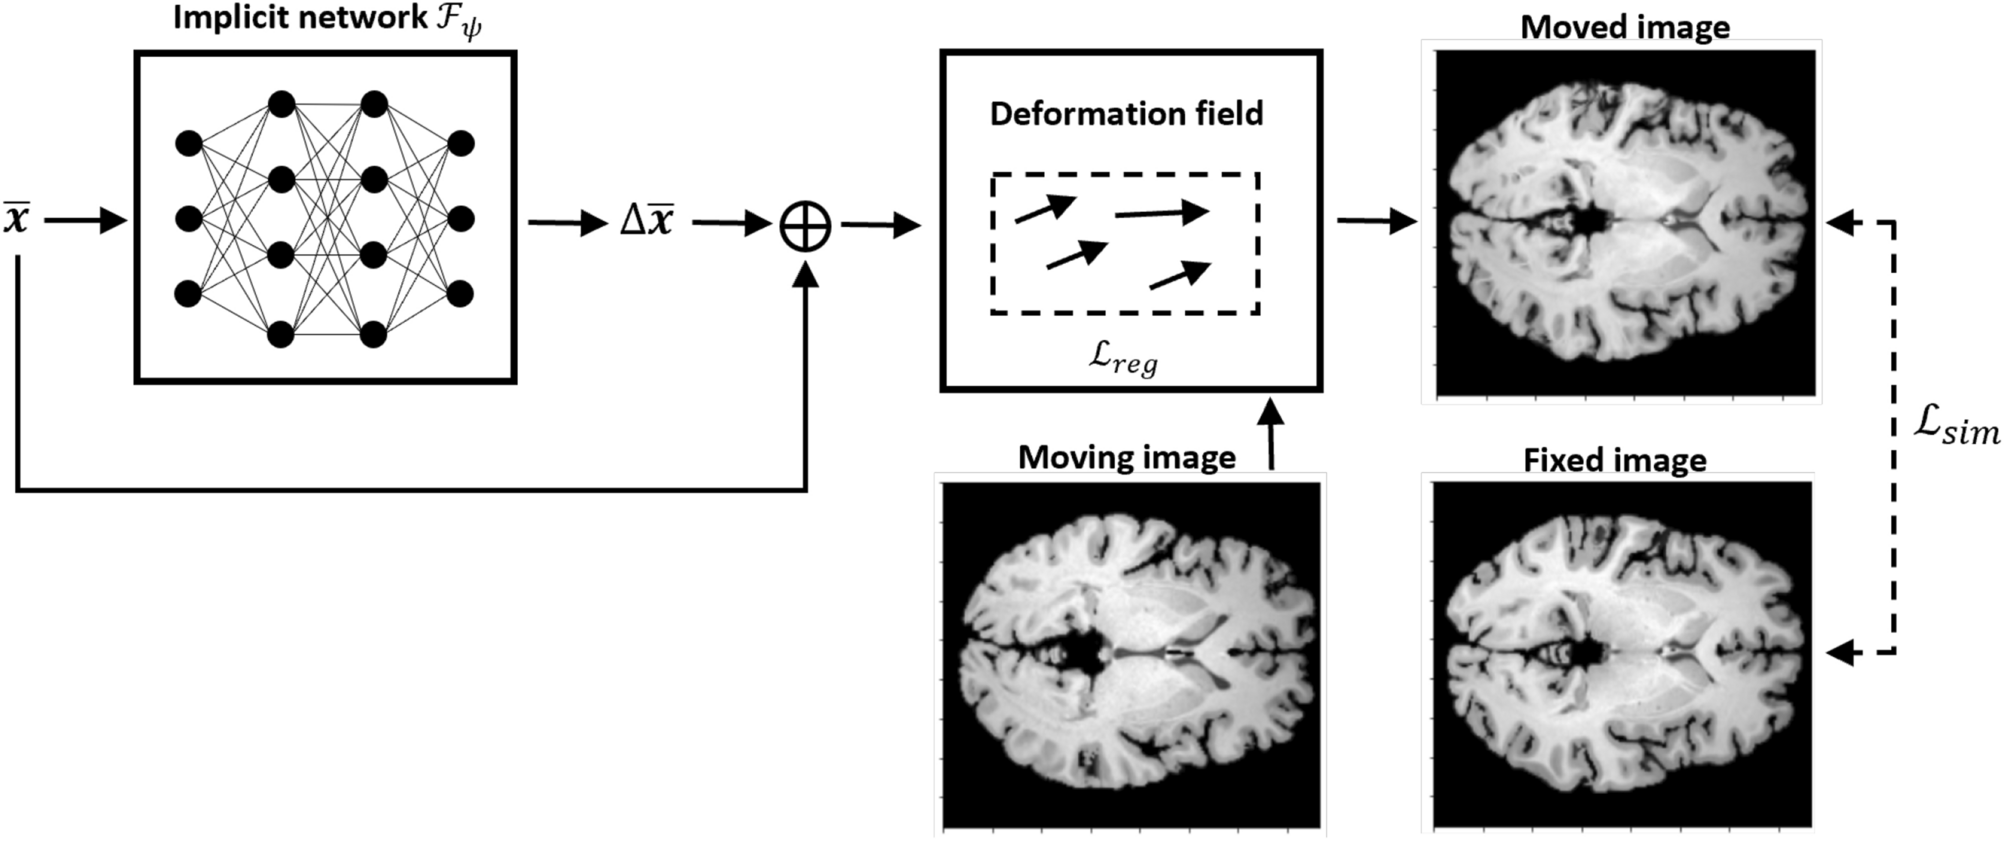 Exploring the performance of implicit neural representations for